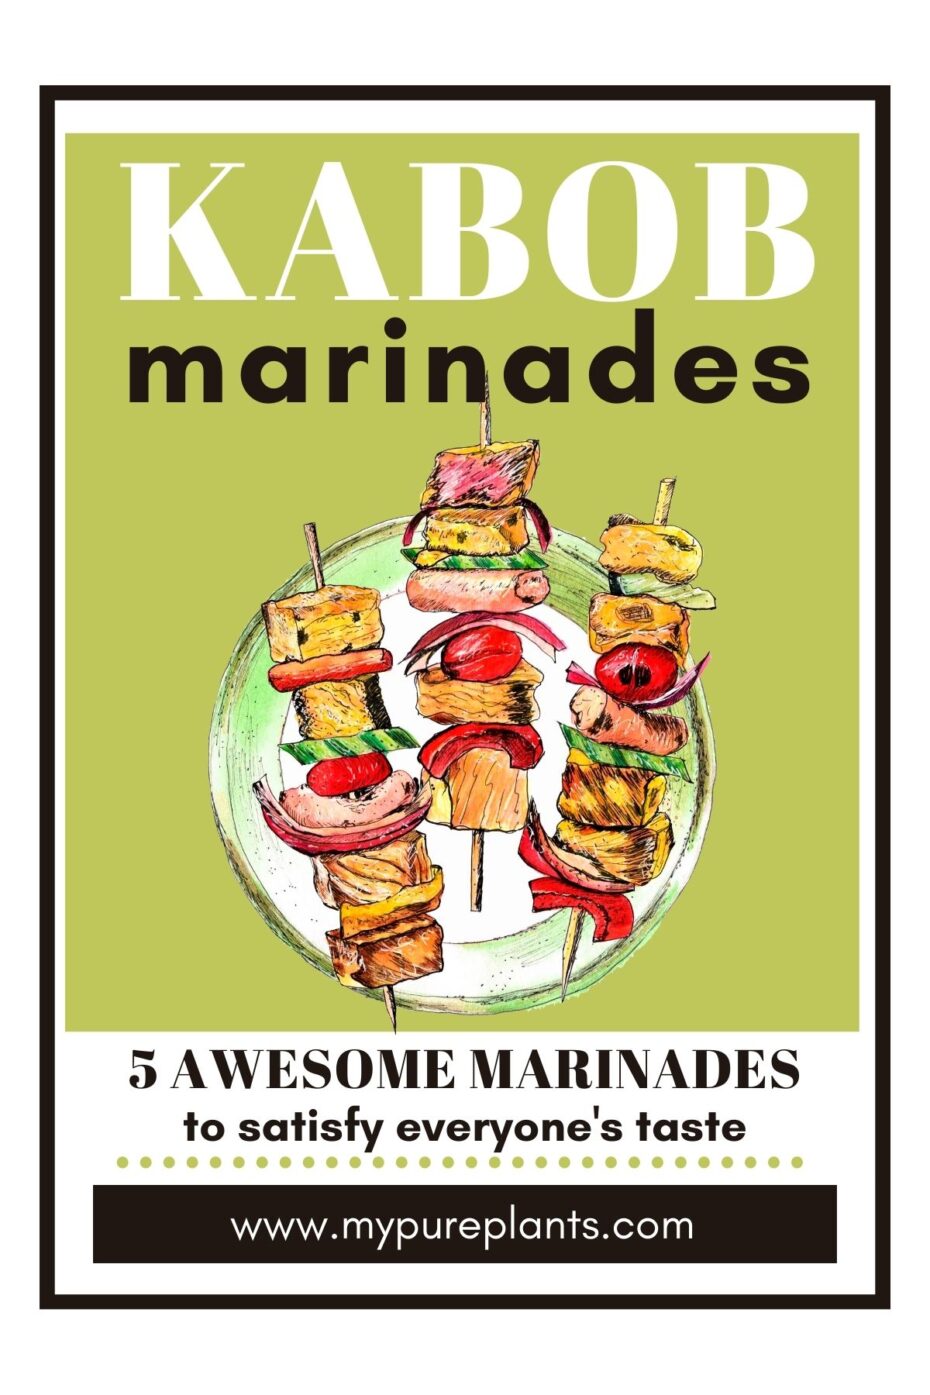 Cover of our kabob marinades ebook showing 3 kabobs and overlay text